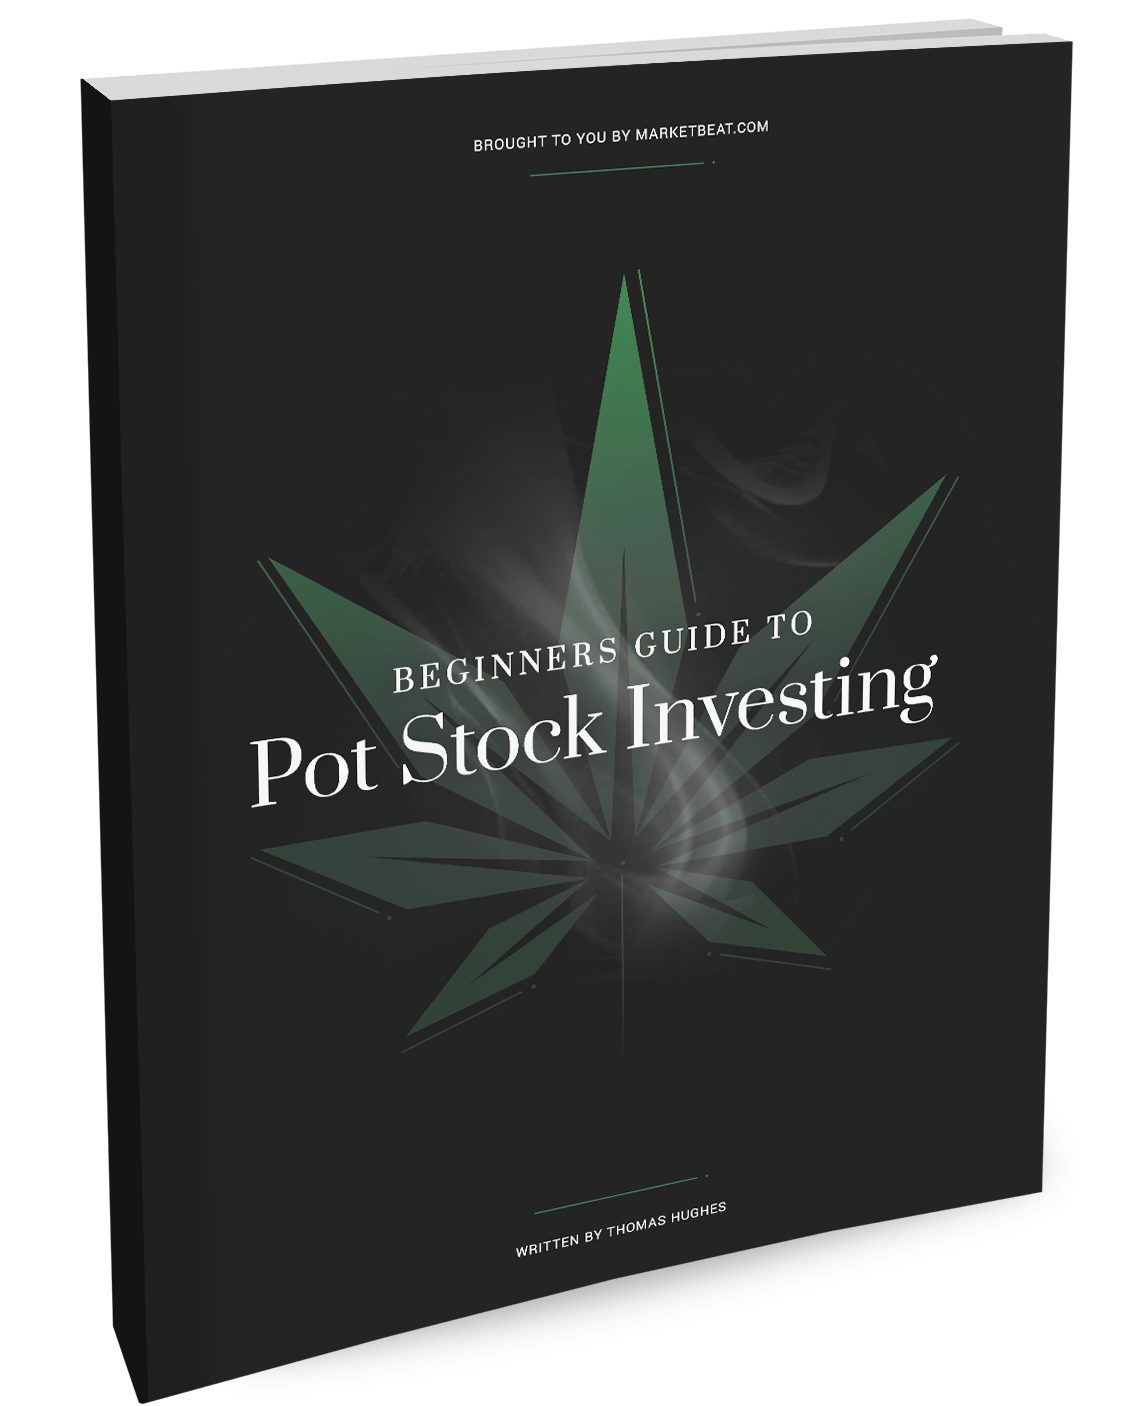 A Beginner's Cover Guide to Investing in Pot Stocks